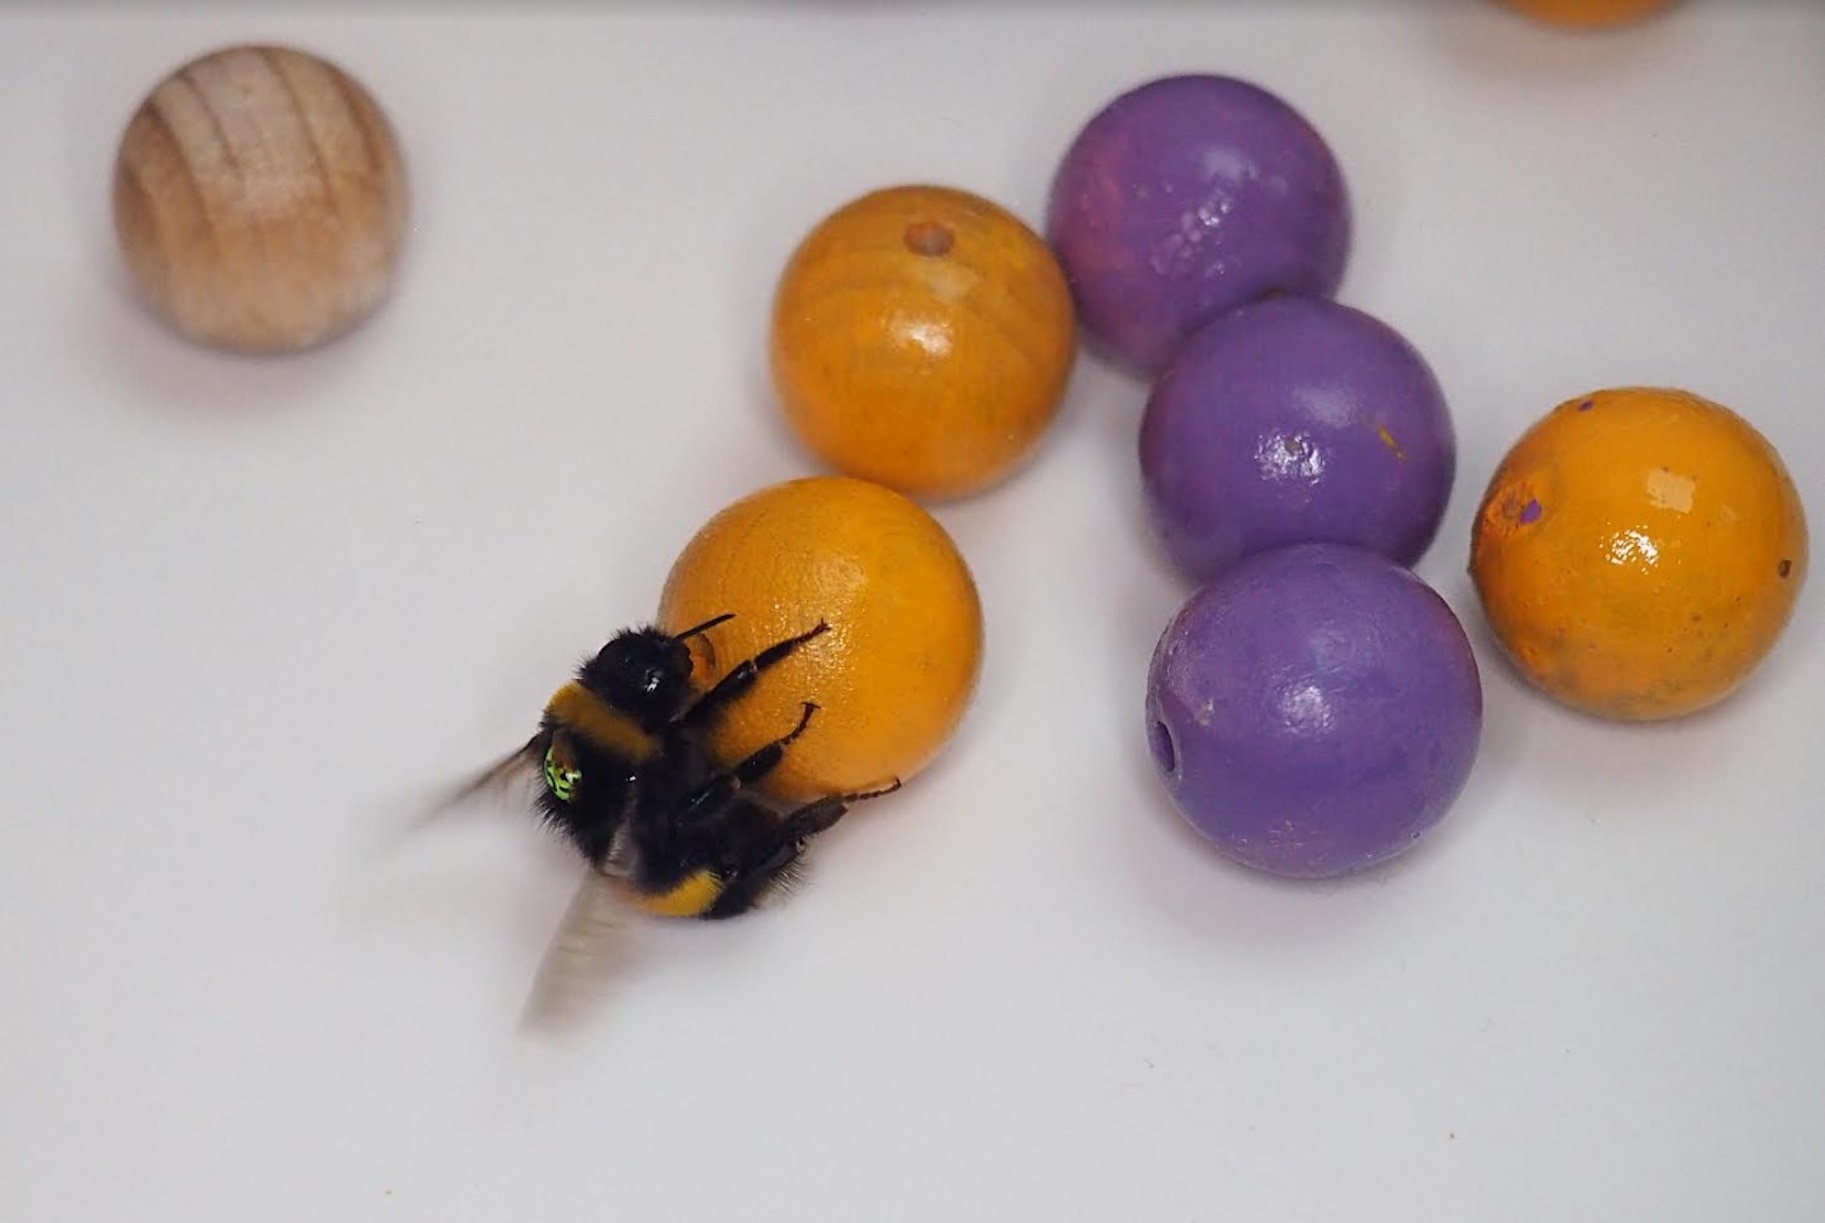 Bee Playing With Wooden Balls